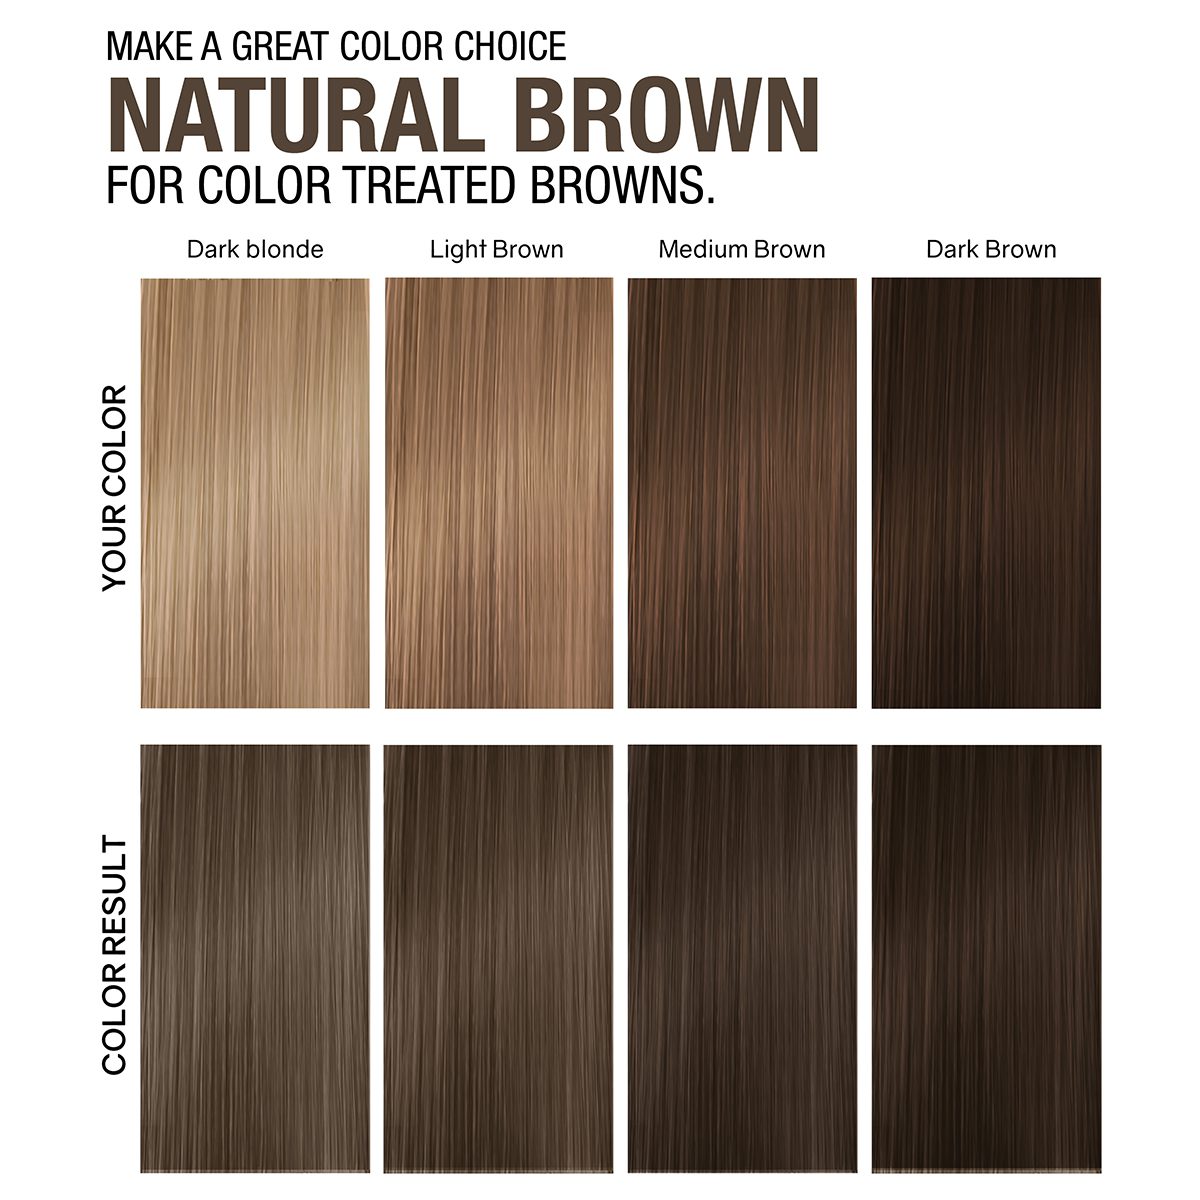 Natural Brown for color treated browns.